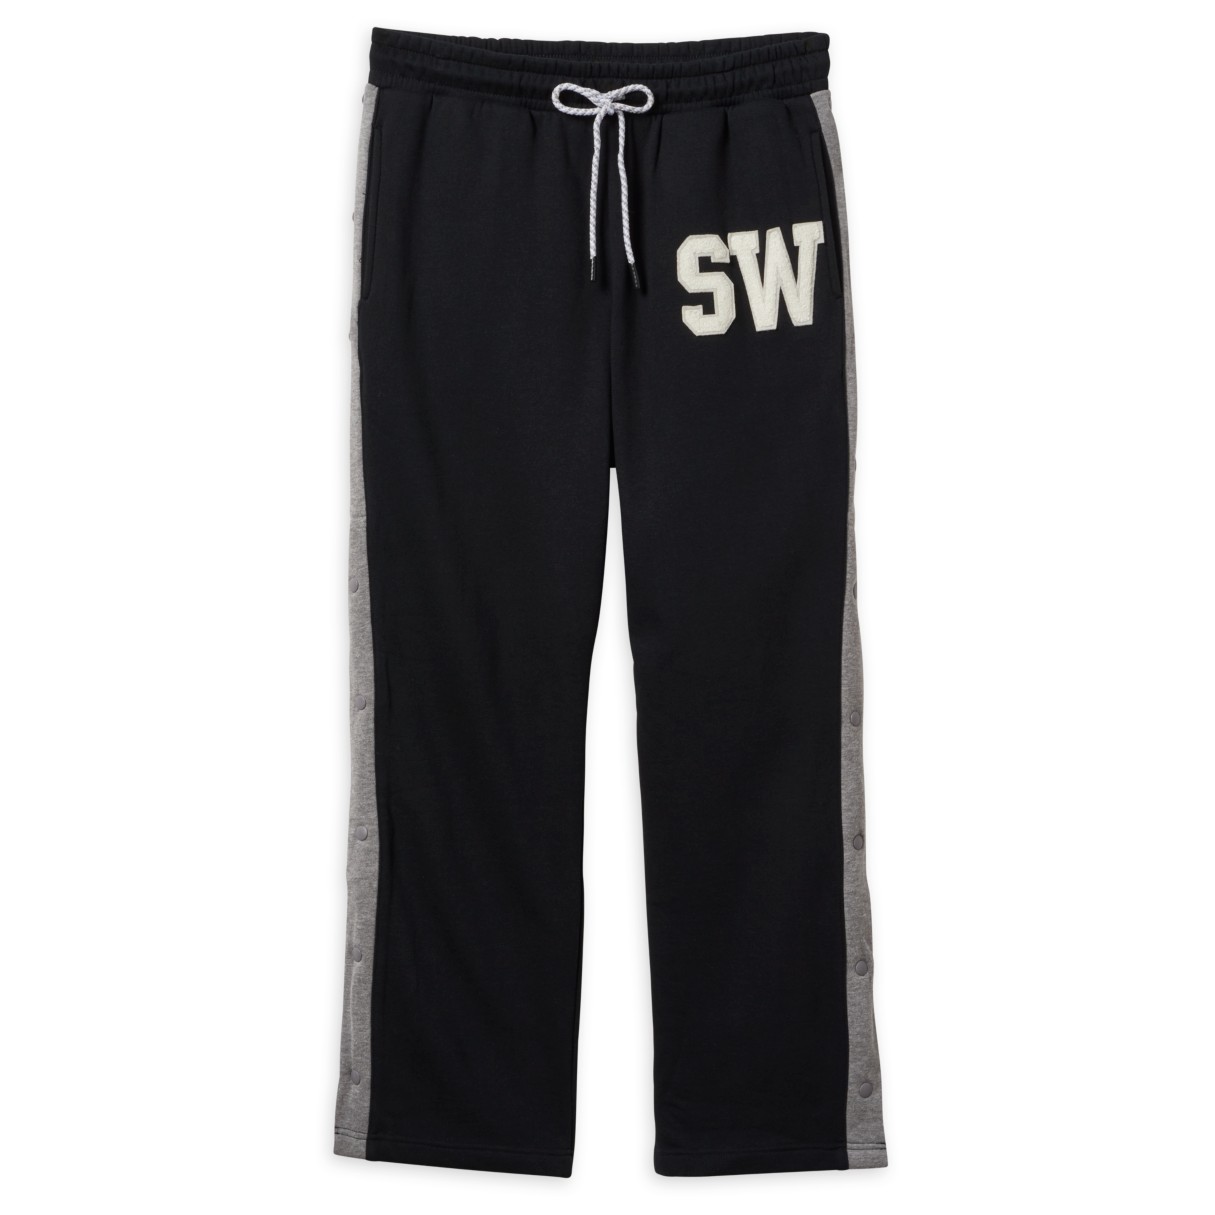 Star Wars Sweatpants for Adults